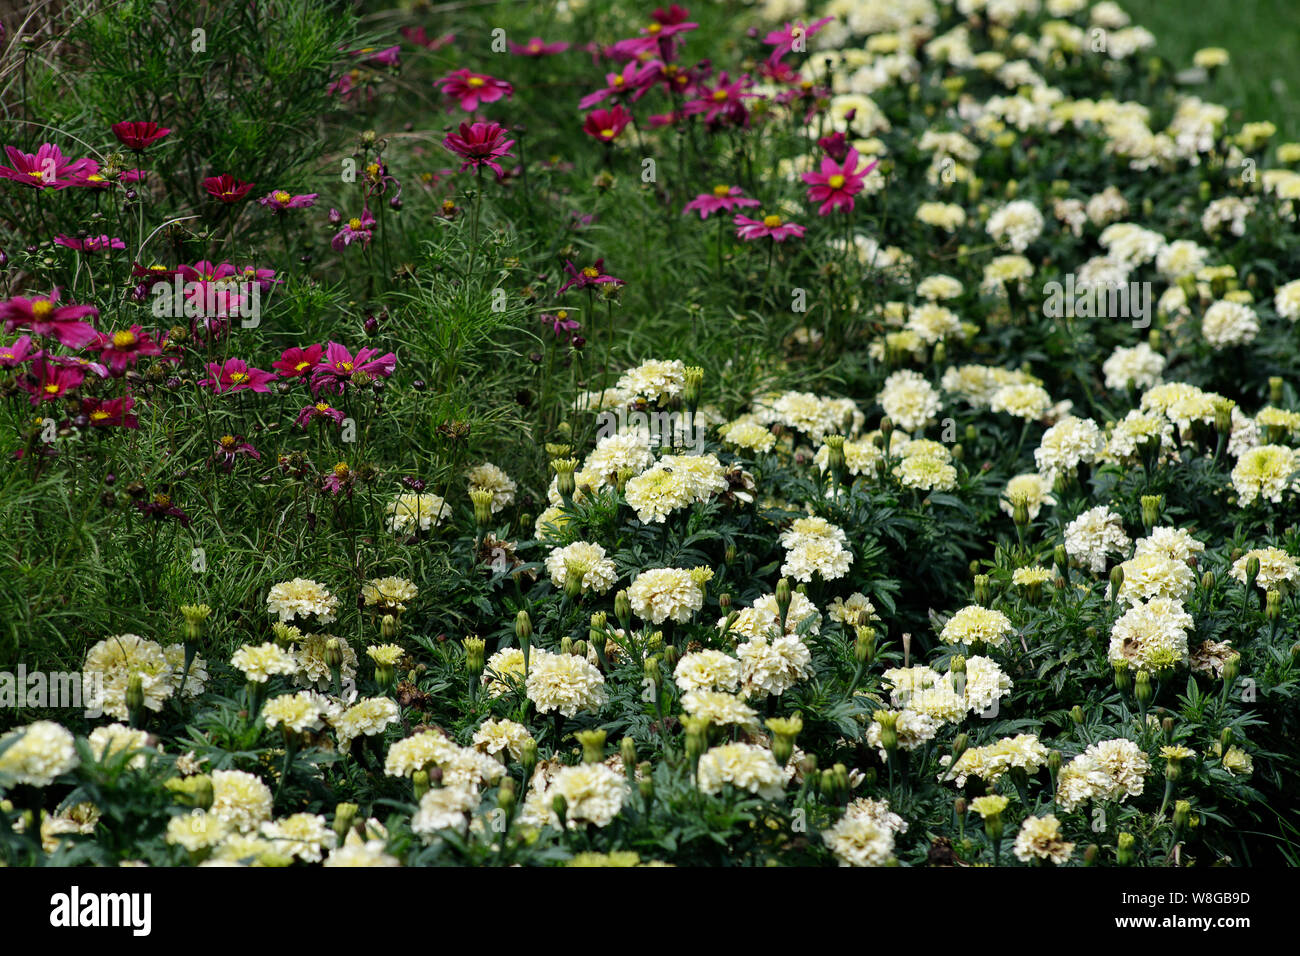 Flower bed in the city Park. A beautiful combination of bright pink cosmea and cream marigolds landscape design Stock Photo